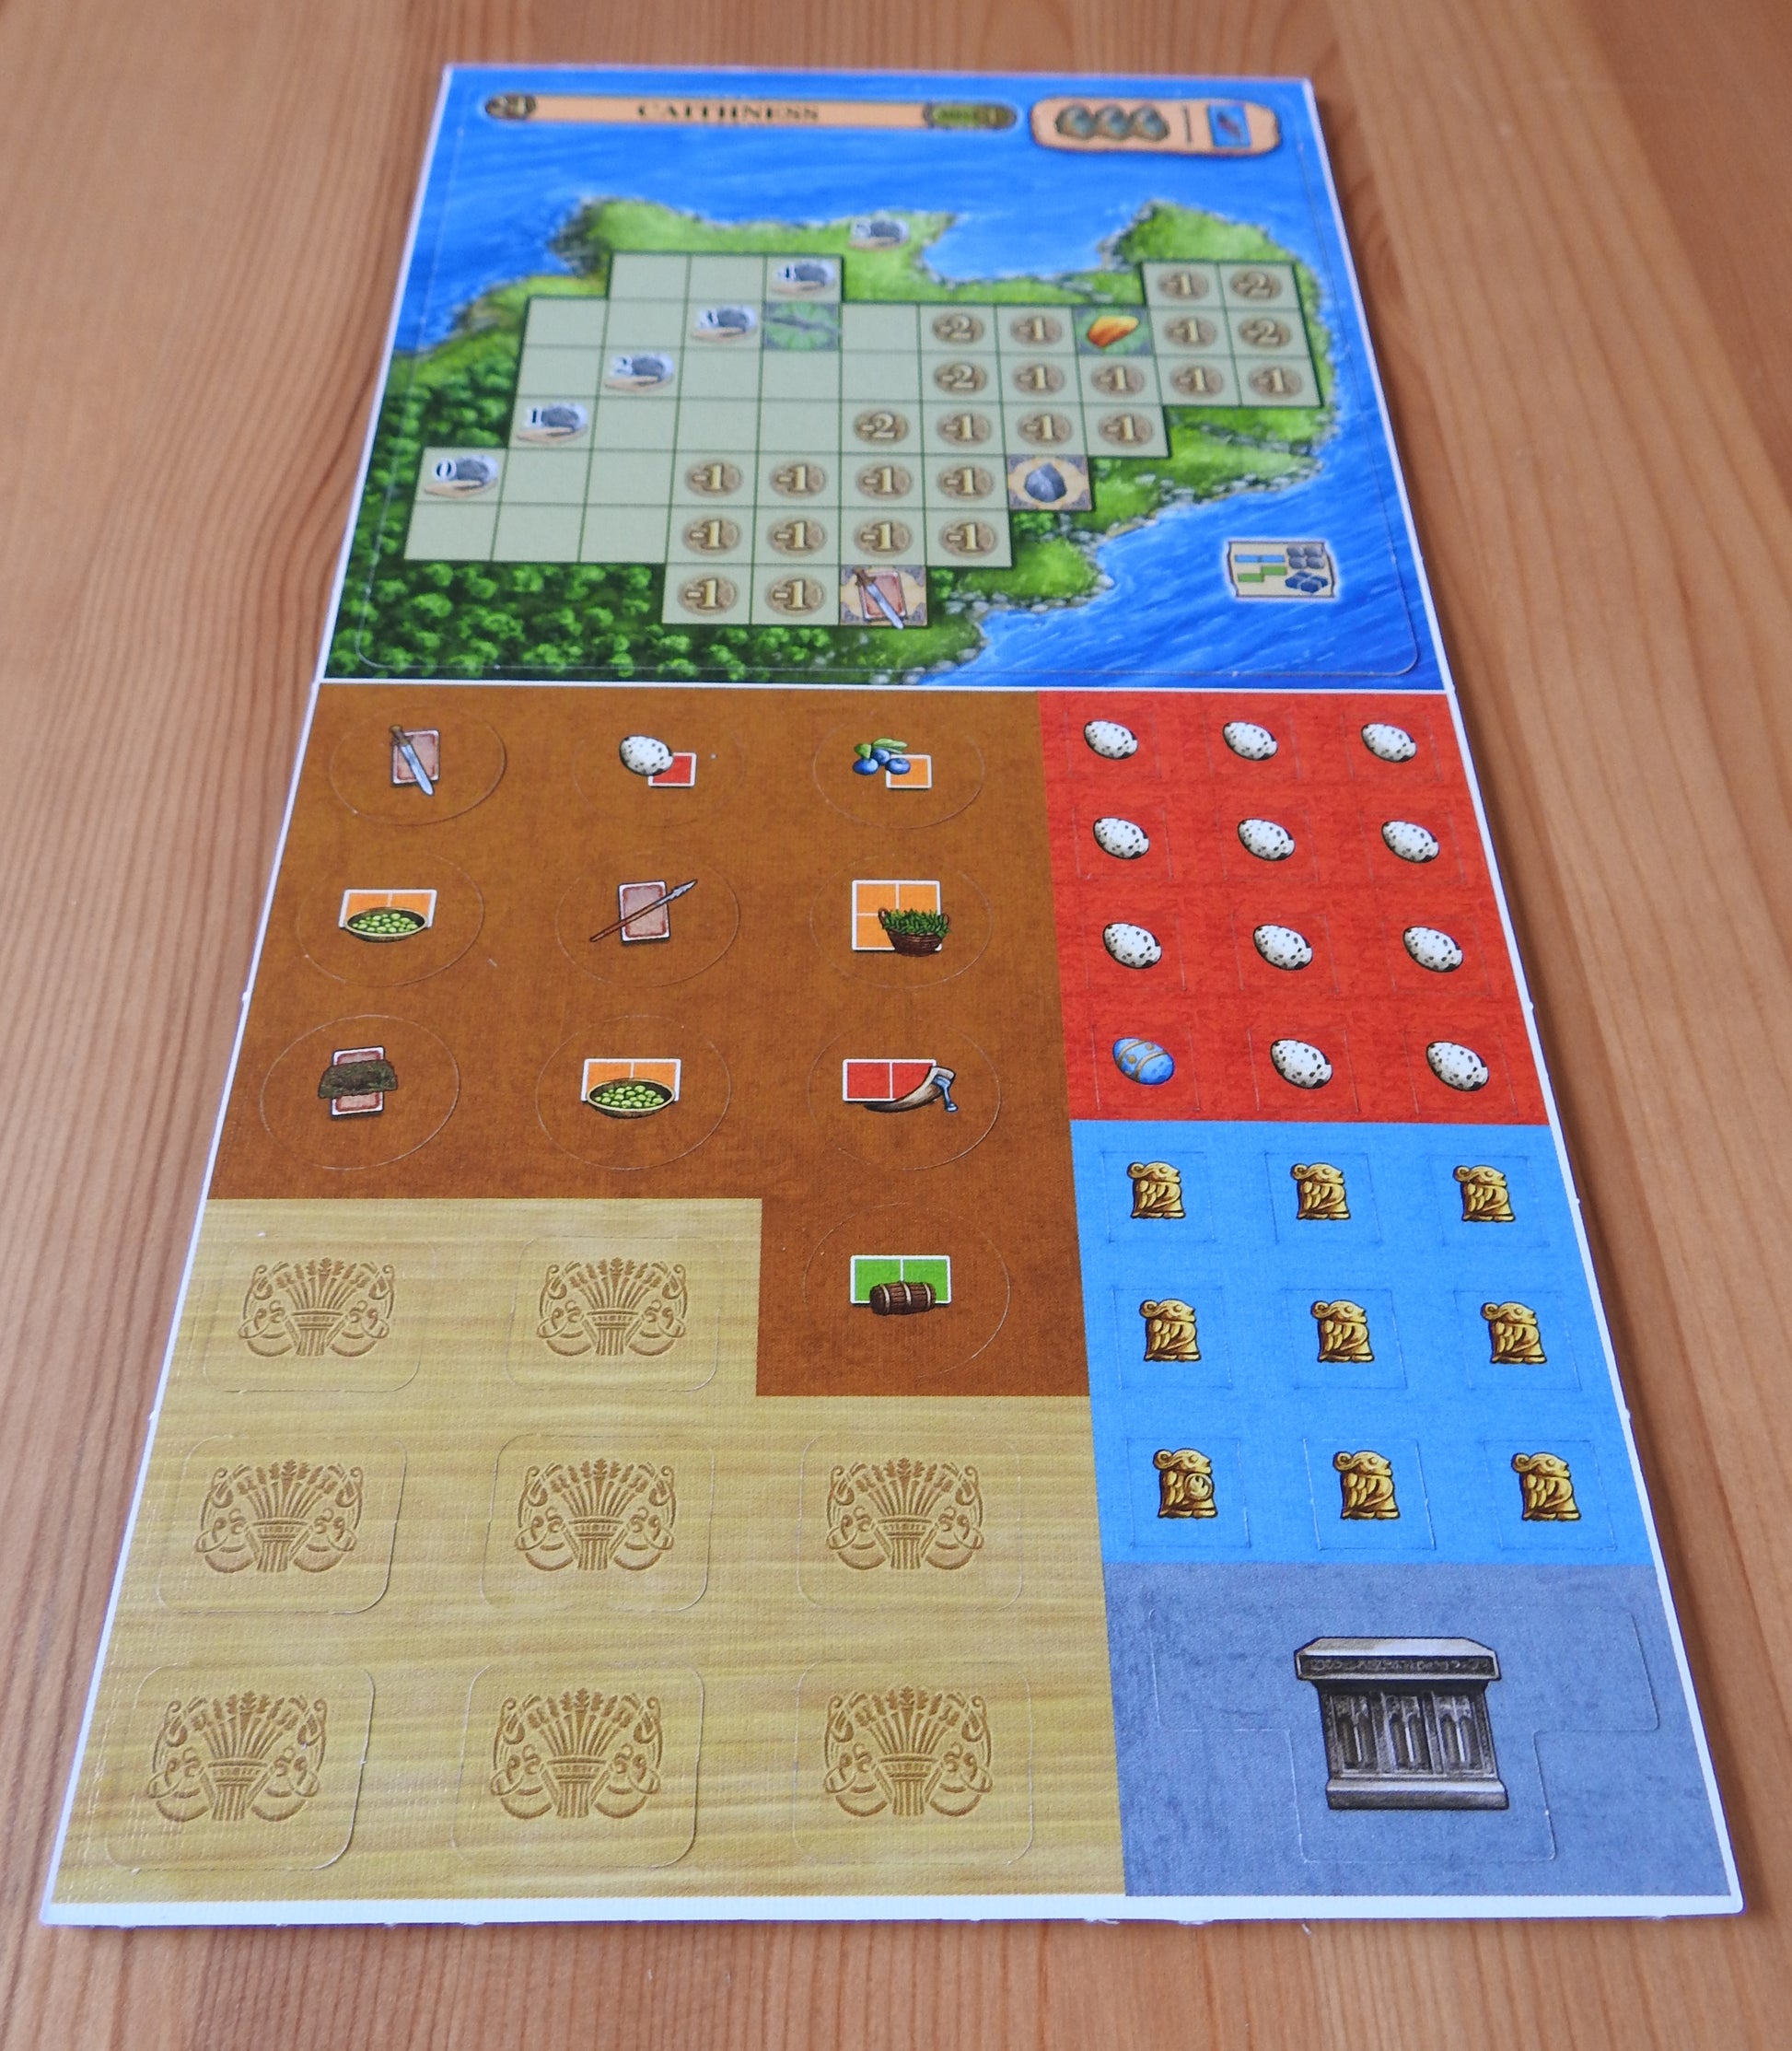 Another view showing the Caithness side of the mini expansion for Feast for Odin.